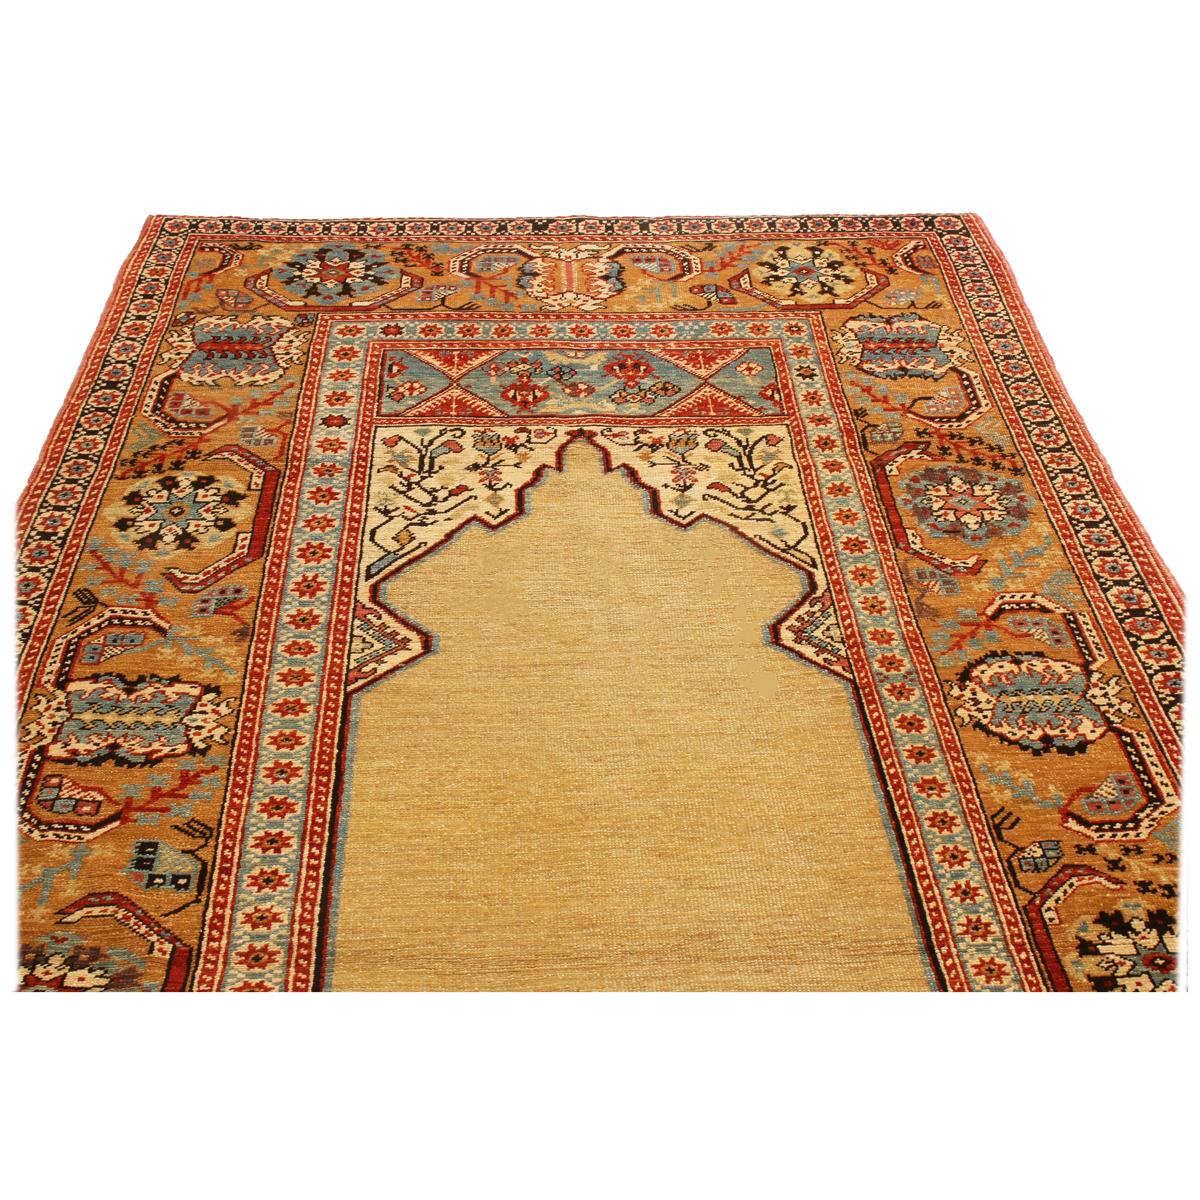 Originating from Turkey, this new transitional wool rug depicts an ottoman design in rich and varied colorways resembling select antique pieces. Hand knotted in high quality wool in low pile, the open sand beige Mihrab field design (representing the